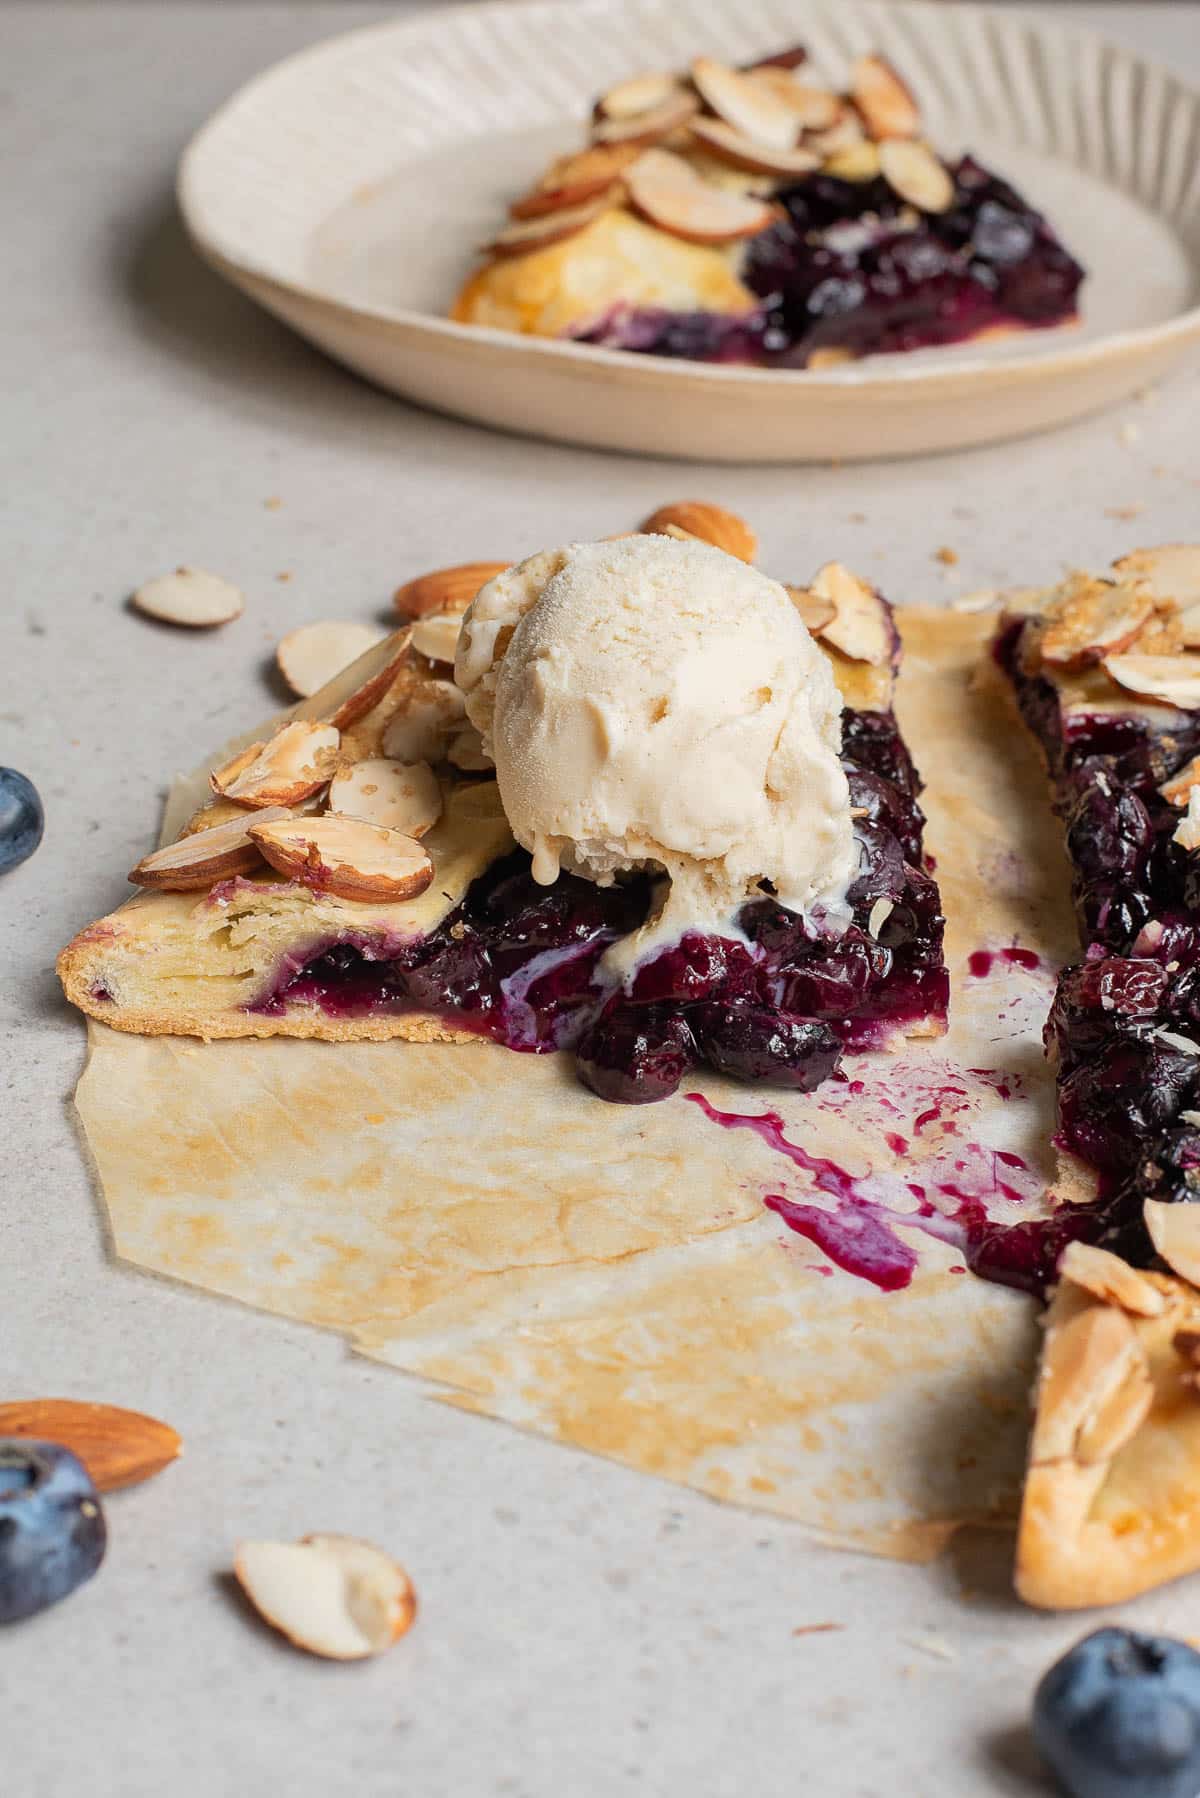 Baked blueberries in a pie crust on parchment paper sprinkled with almonds and topped with ice cream.